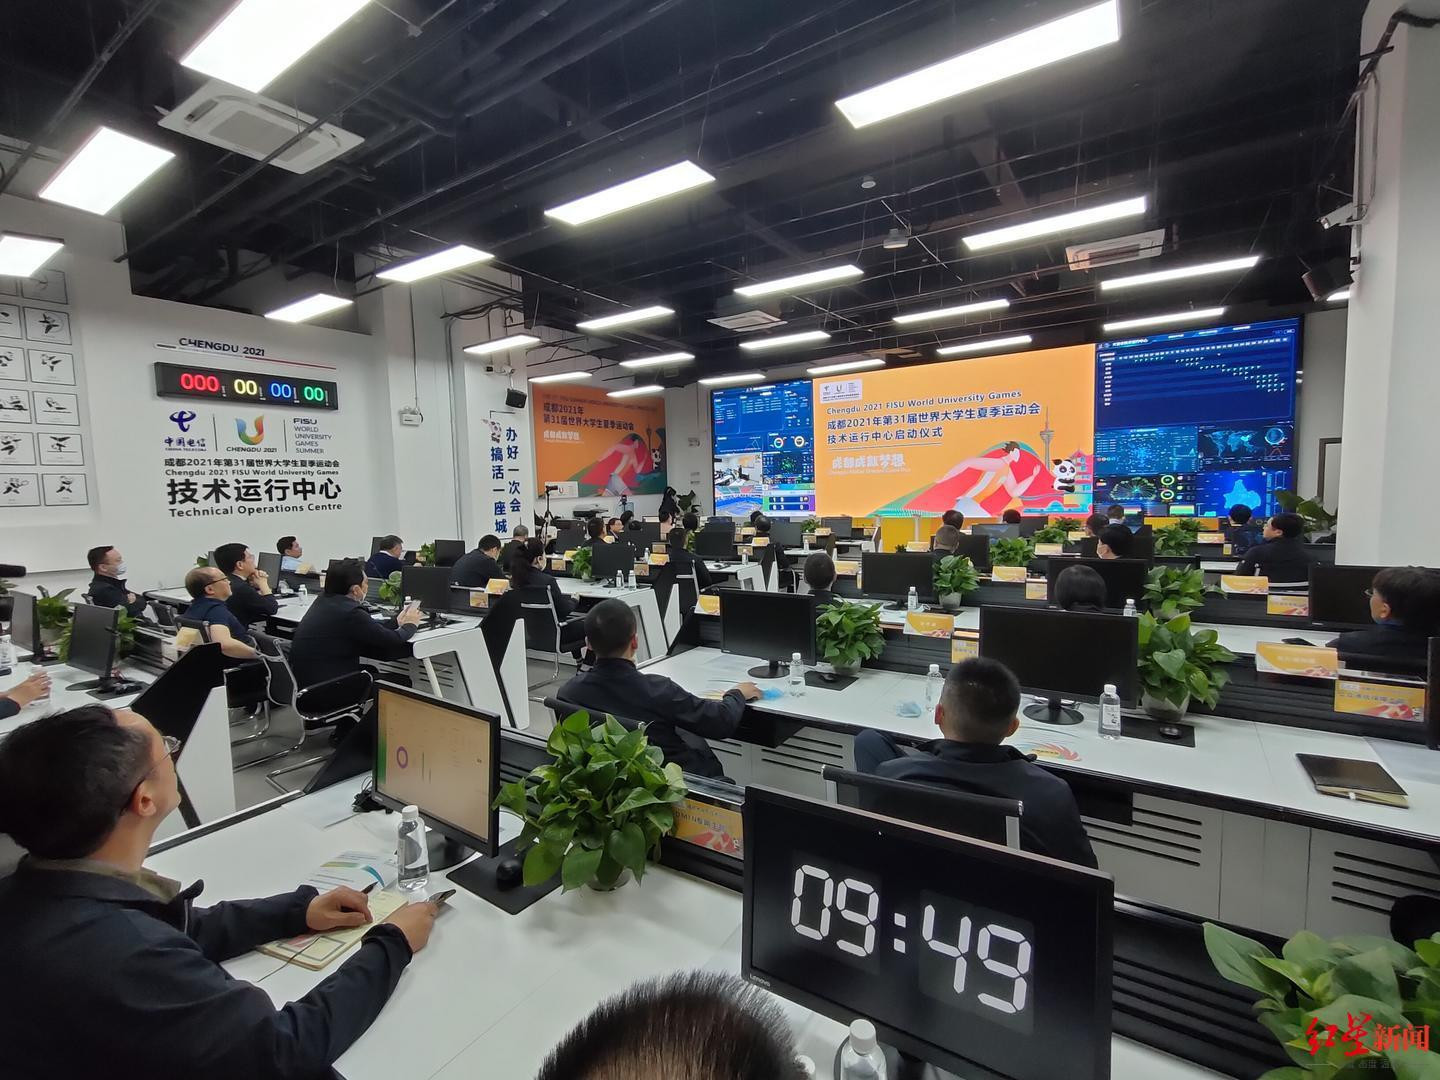 Chengdu 2021 technical operations centre officially opens